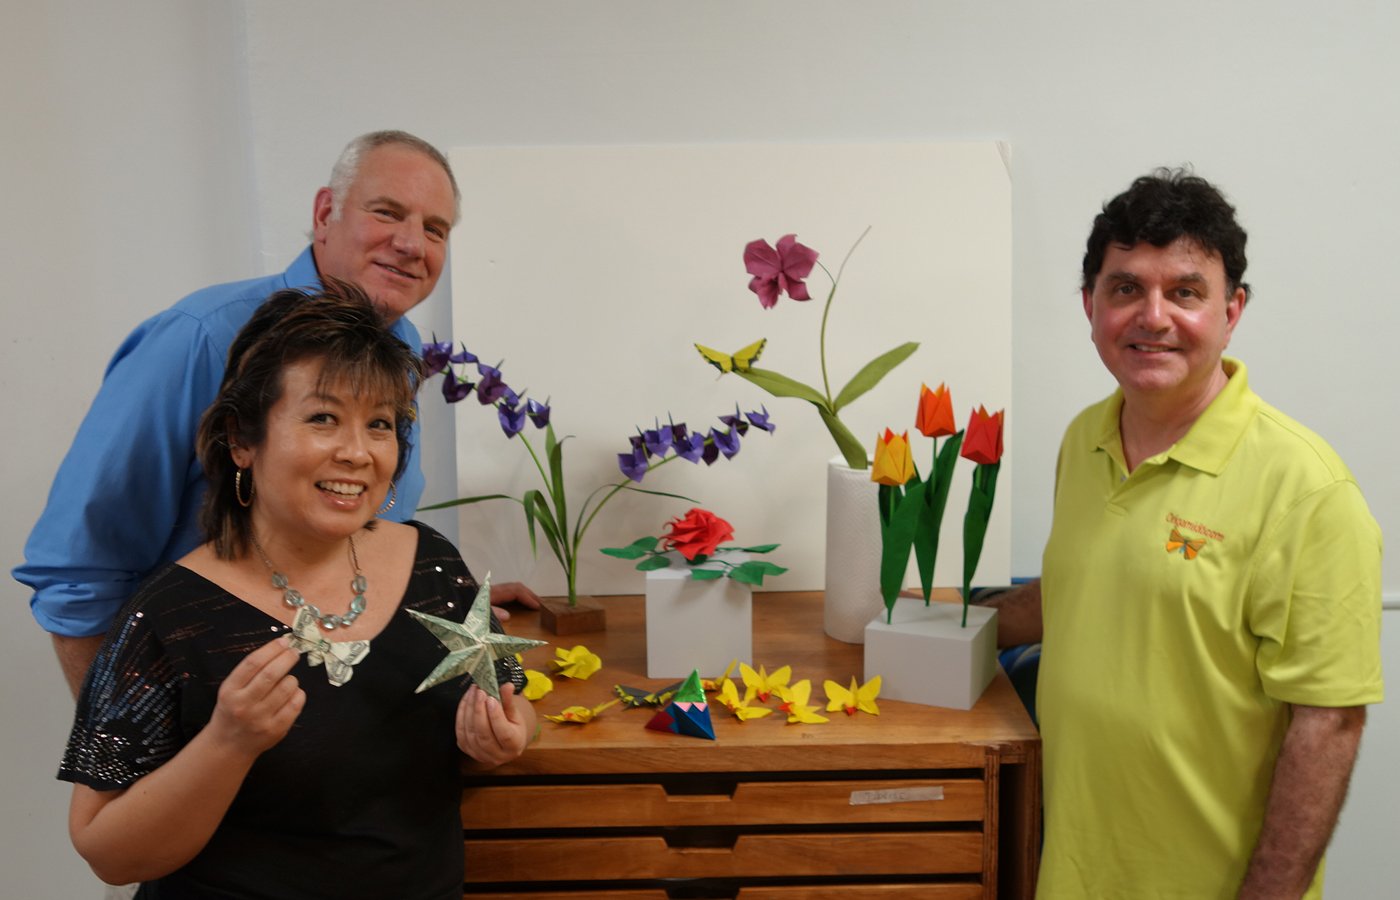 With origami masters Richard Alexander and Michael LaFosse.